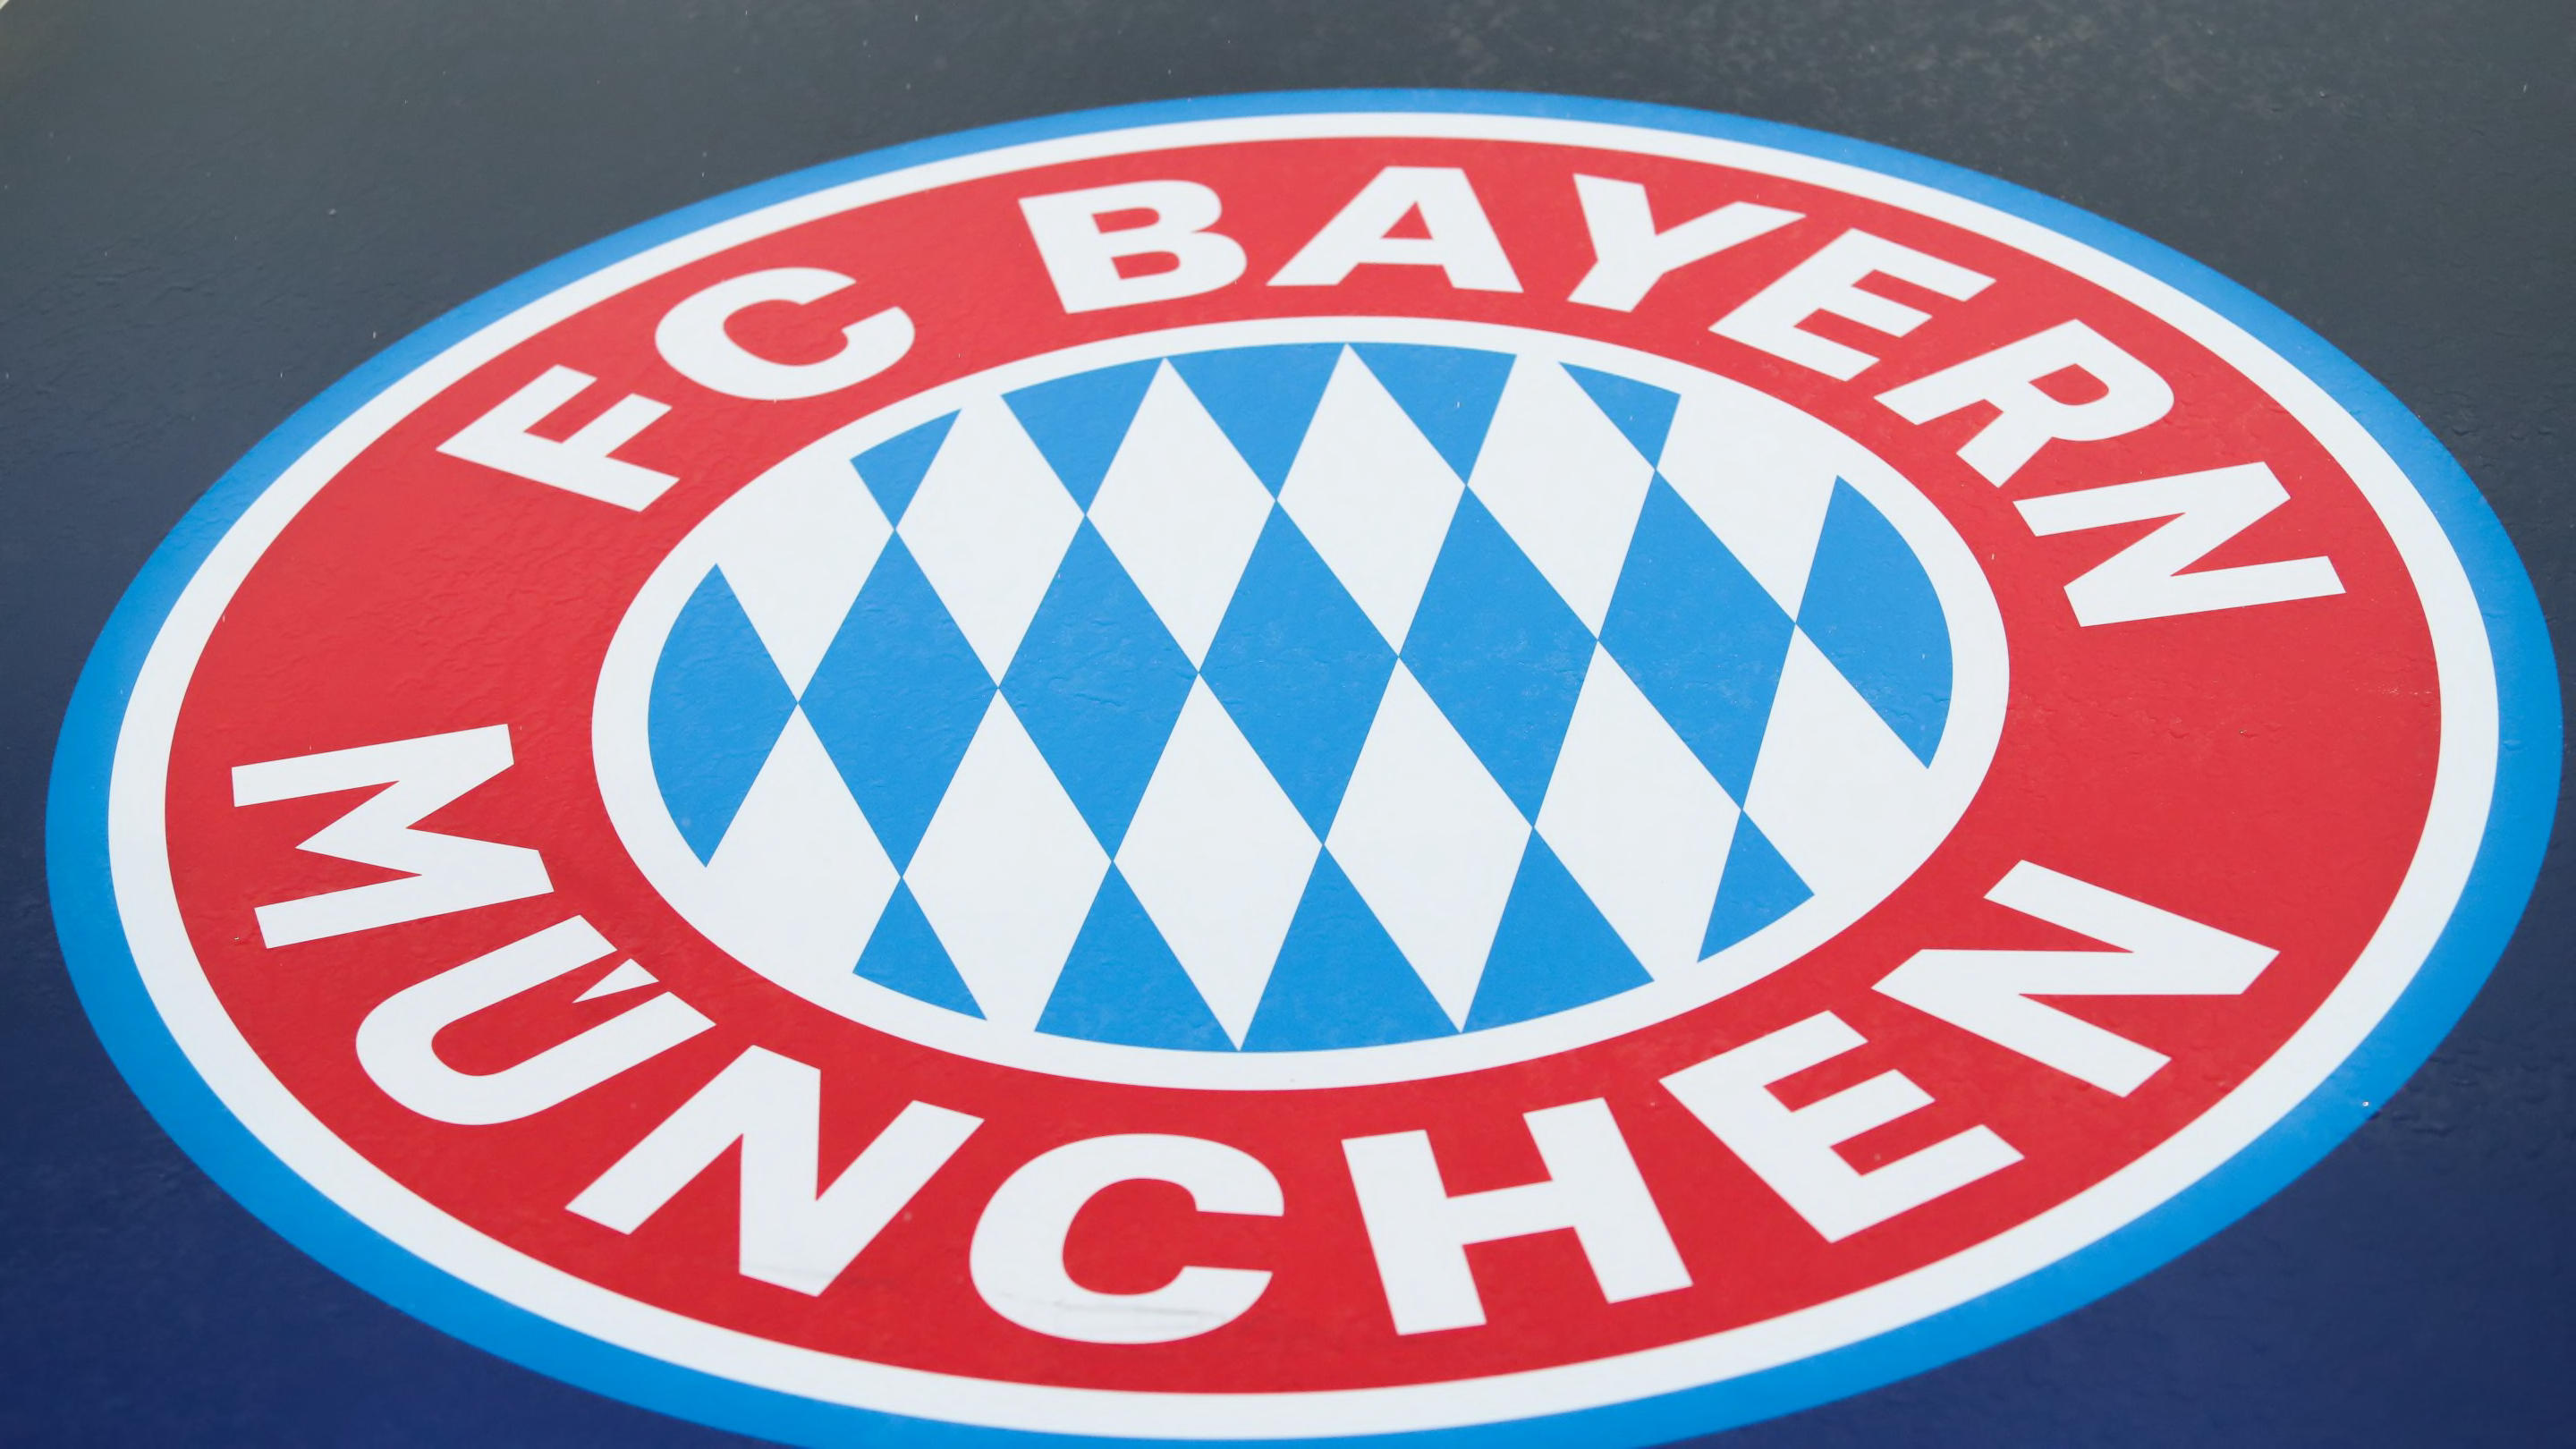 Seven facts from the last time Bayern Munich didn't win the Bundesliga